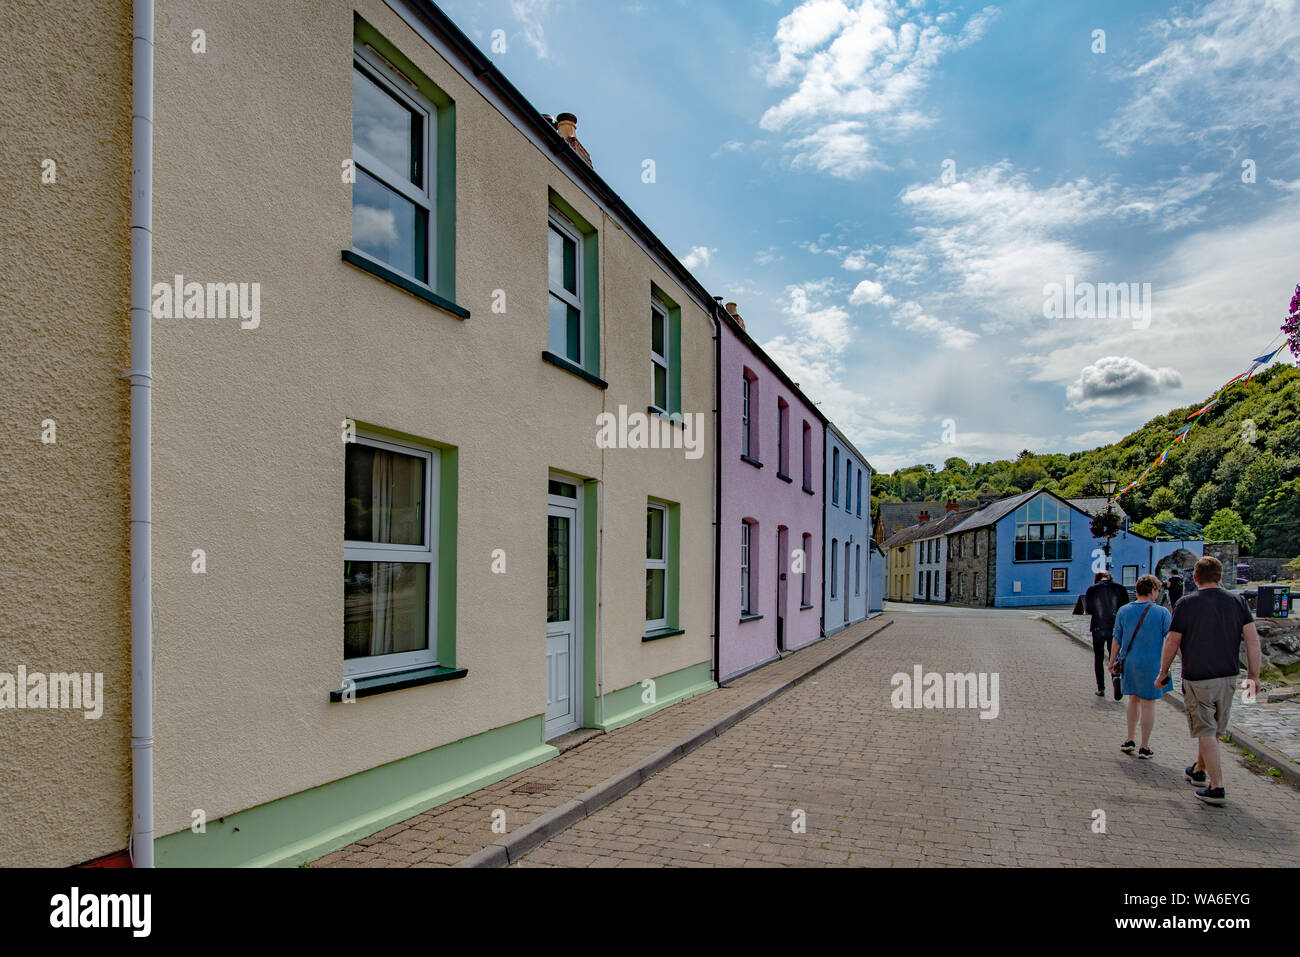 Fishguard, Wales, UK - Aug 12, 2019: Row of colourful houses  in the old port of Fishguard Stock Photo